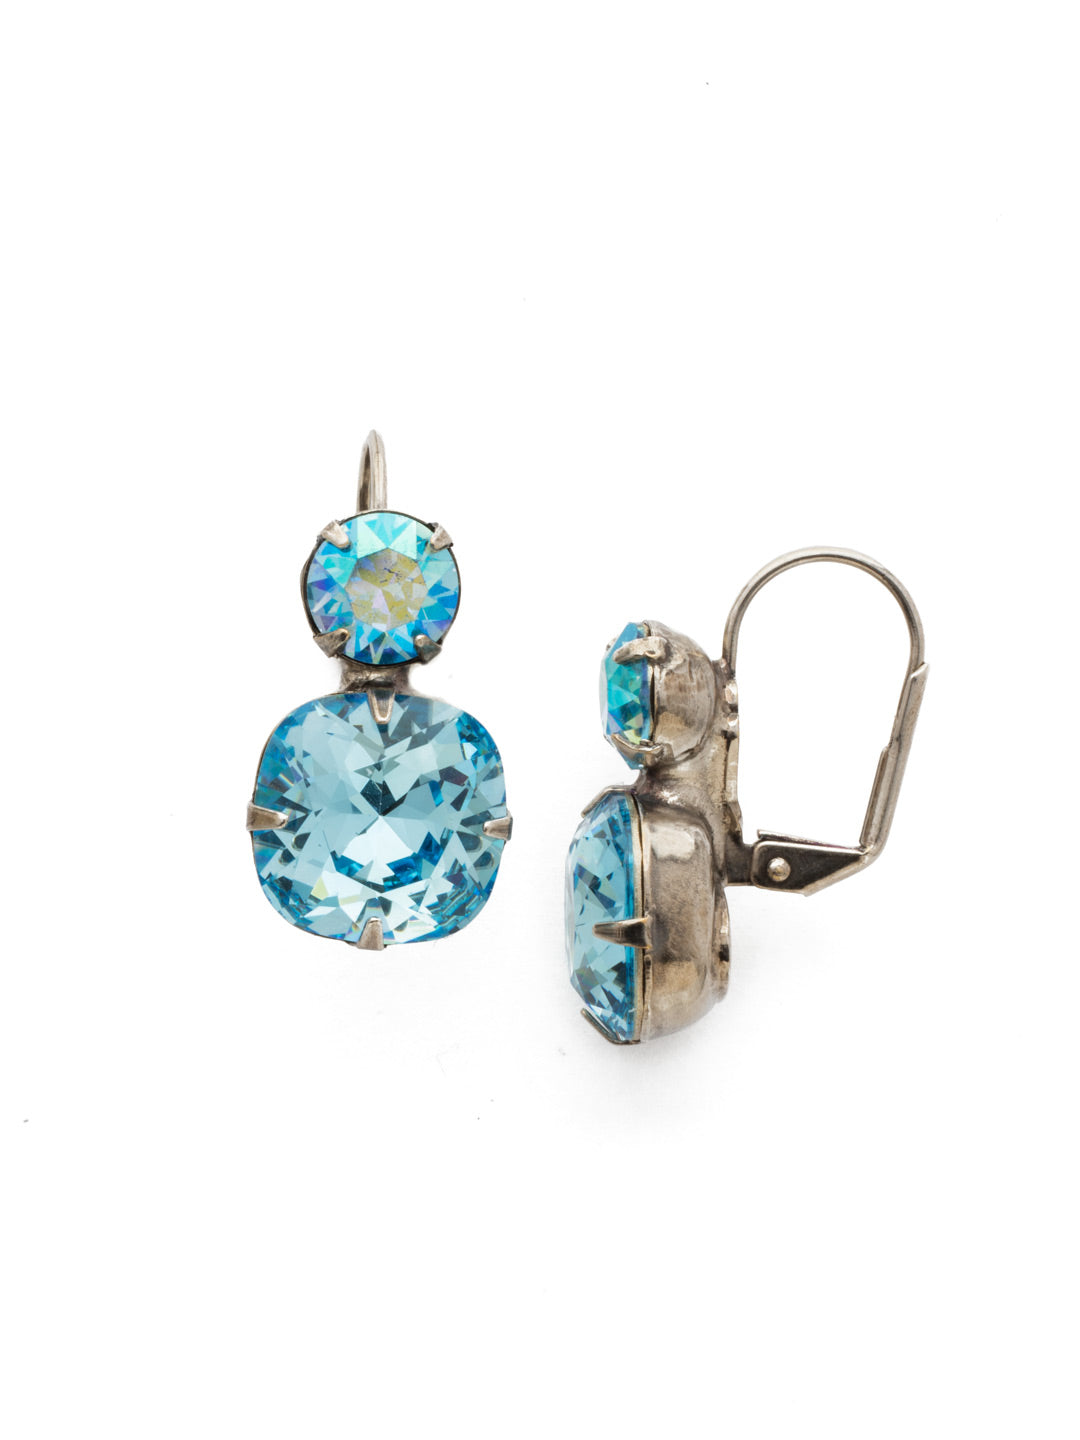 On The Edge Dangle Earrings - ECL4ASAQU - <p>It's simple - round and cushion cut crystals on a french wire earring. These earrings go with anything! You can rest easy knowing you have the perfect go-to pair of earrings in your jewelry box. From Sorrelli's Aquamarine collection in our Antique Silver-tone finish.</p>